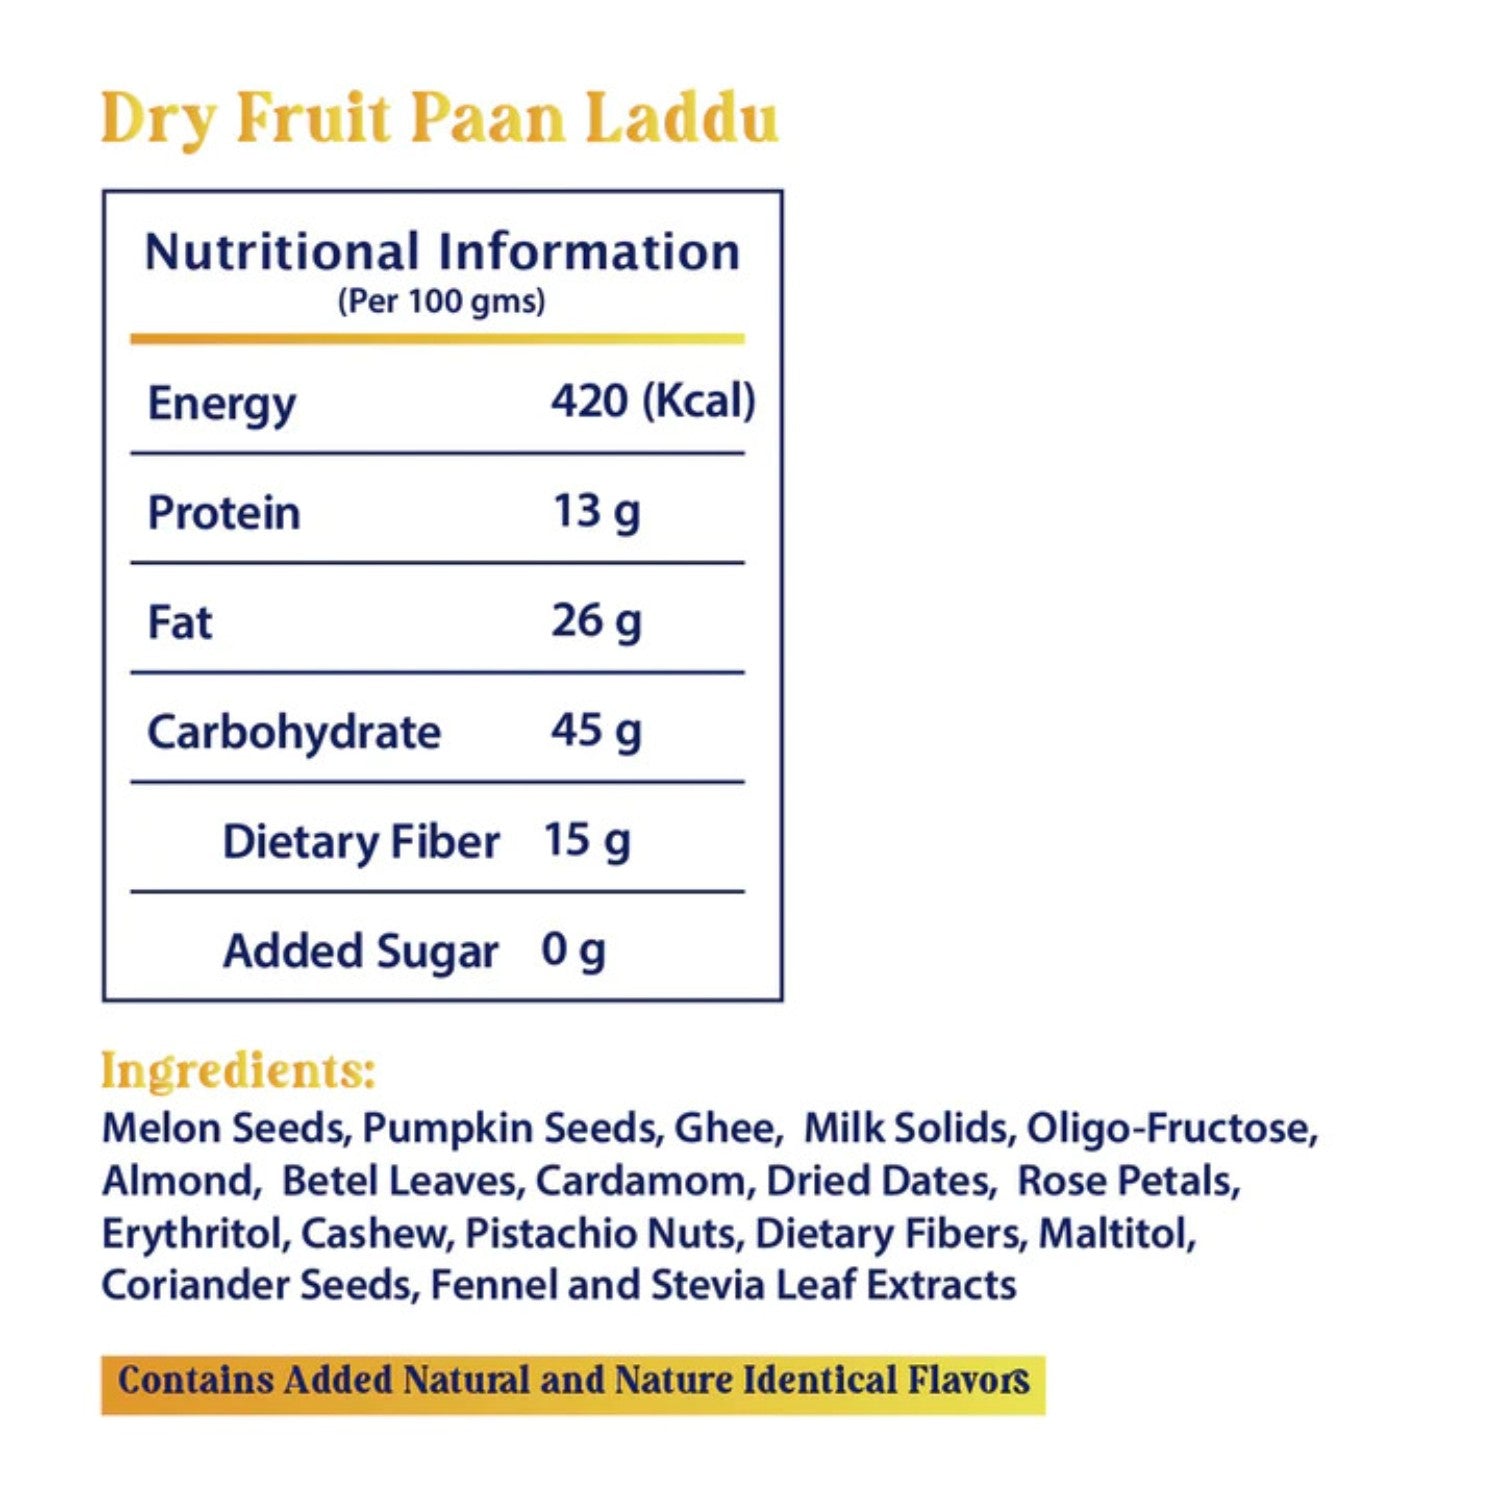 Dry Fruit Paan Laddu by Magicleaf | 100% Natural No Sugar Dessert Sweetened With Stevia | 350 gm